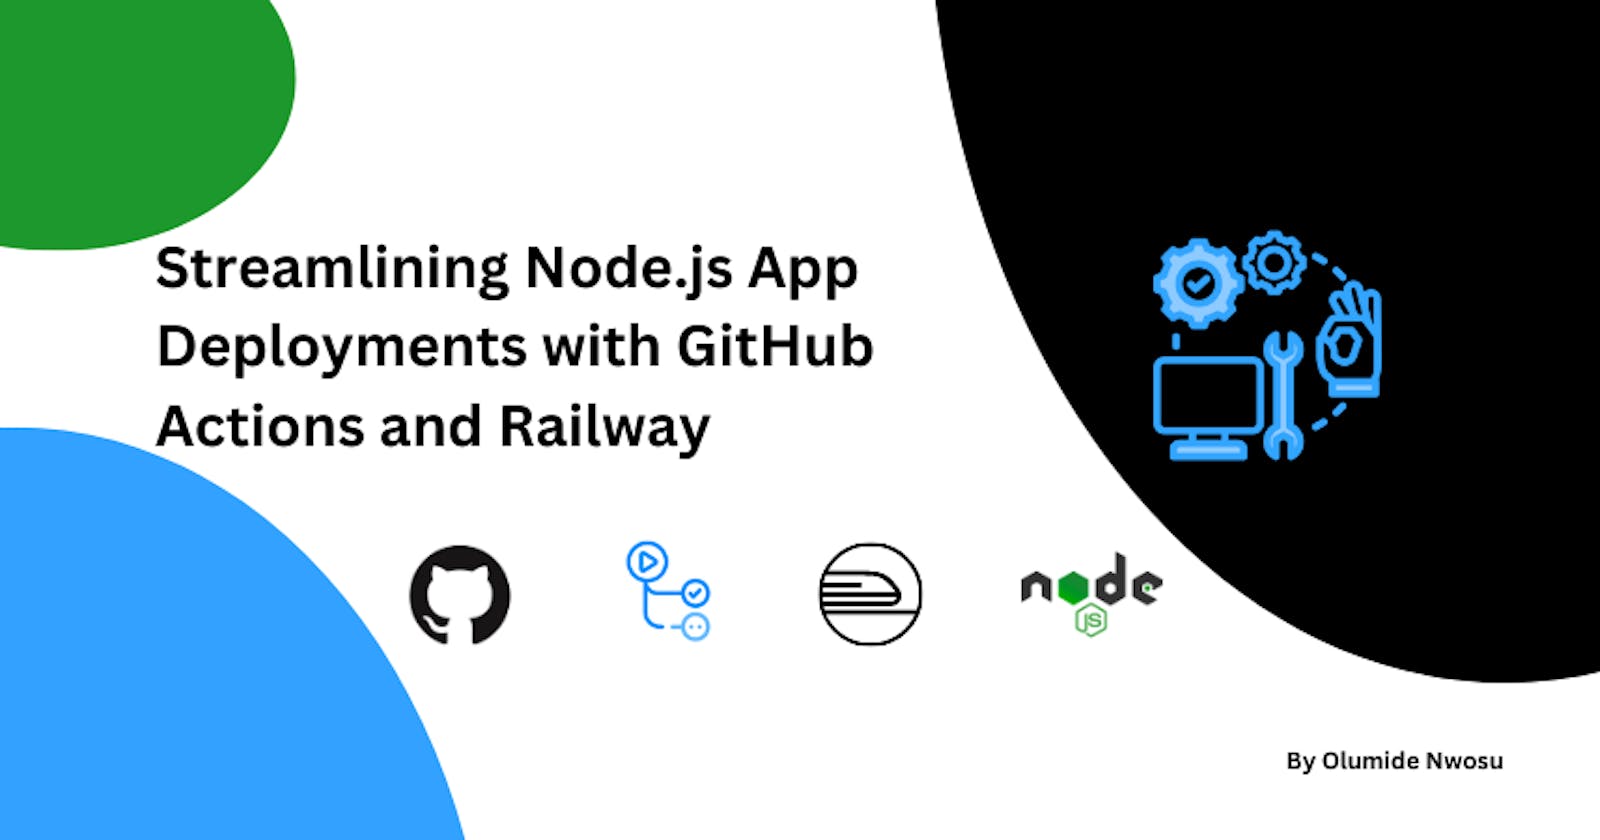 Streamlining Node.js App Deployments with GitHub Actions and Railway